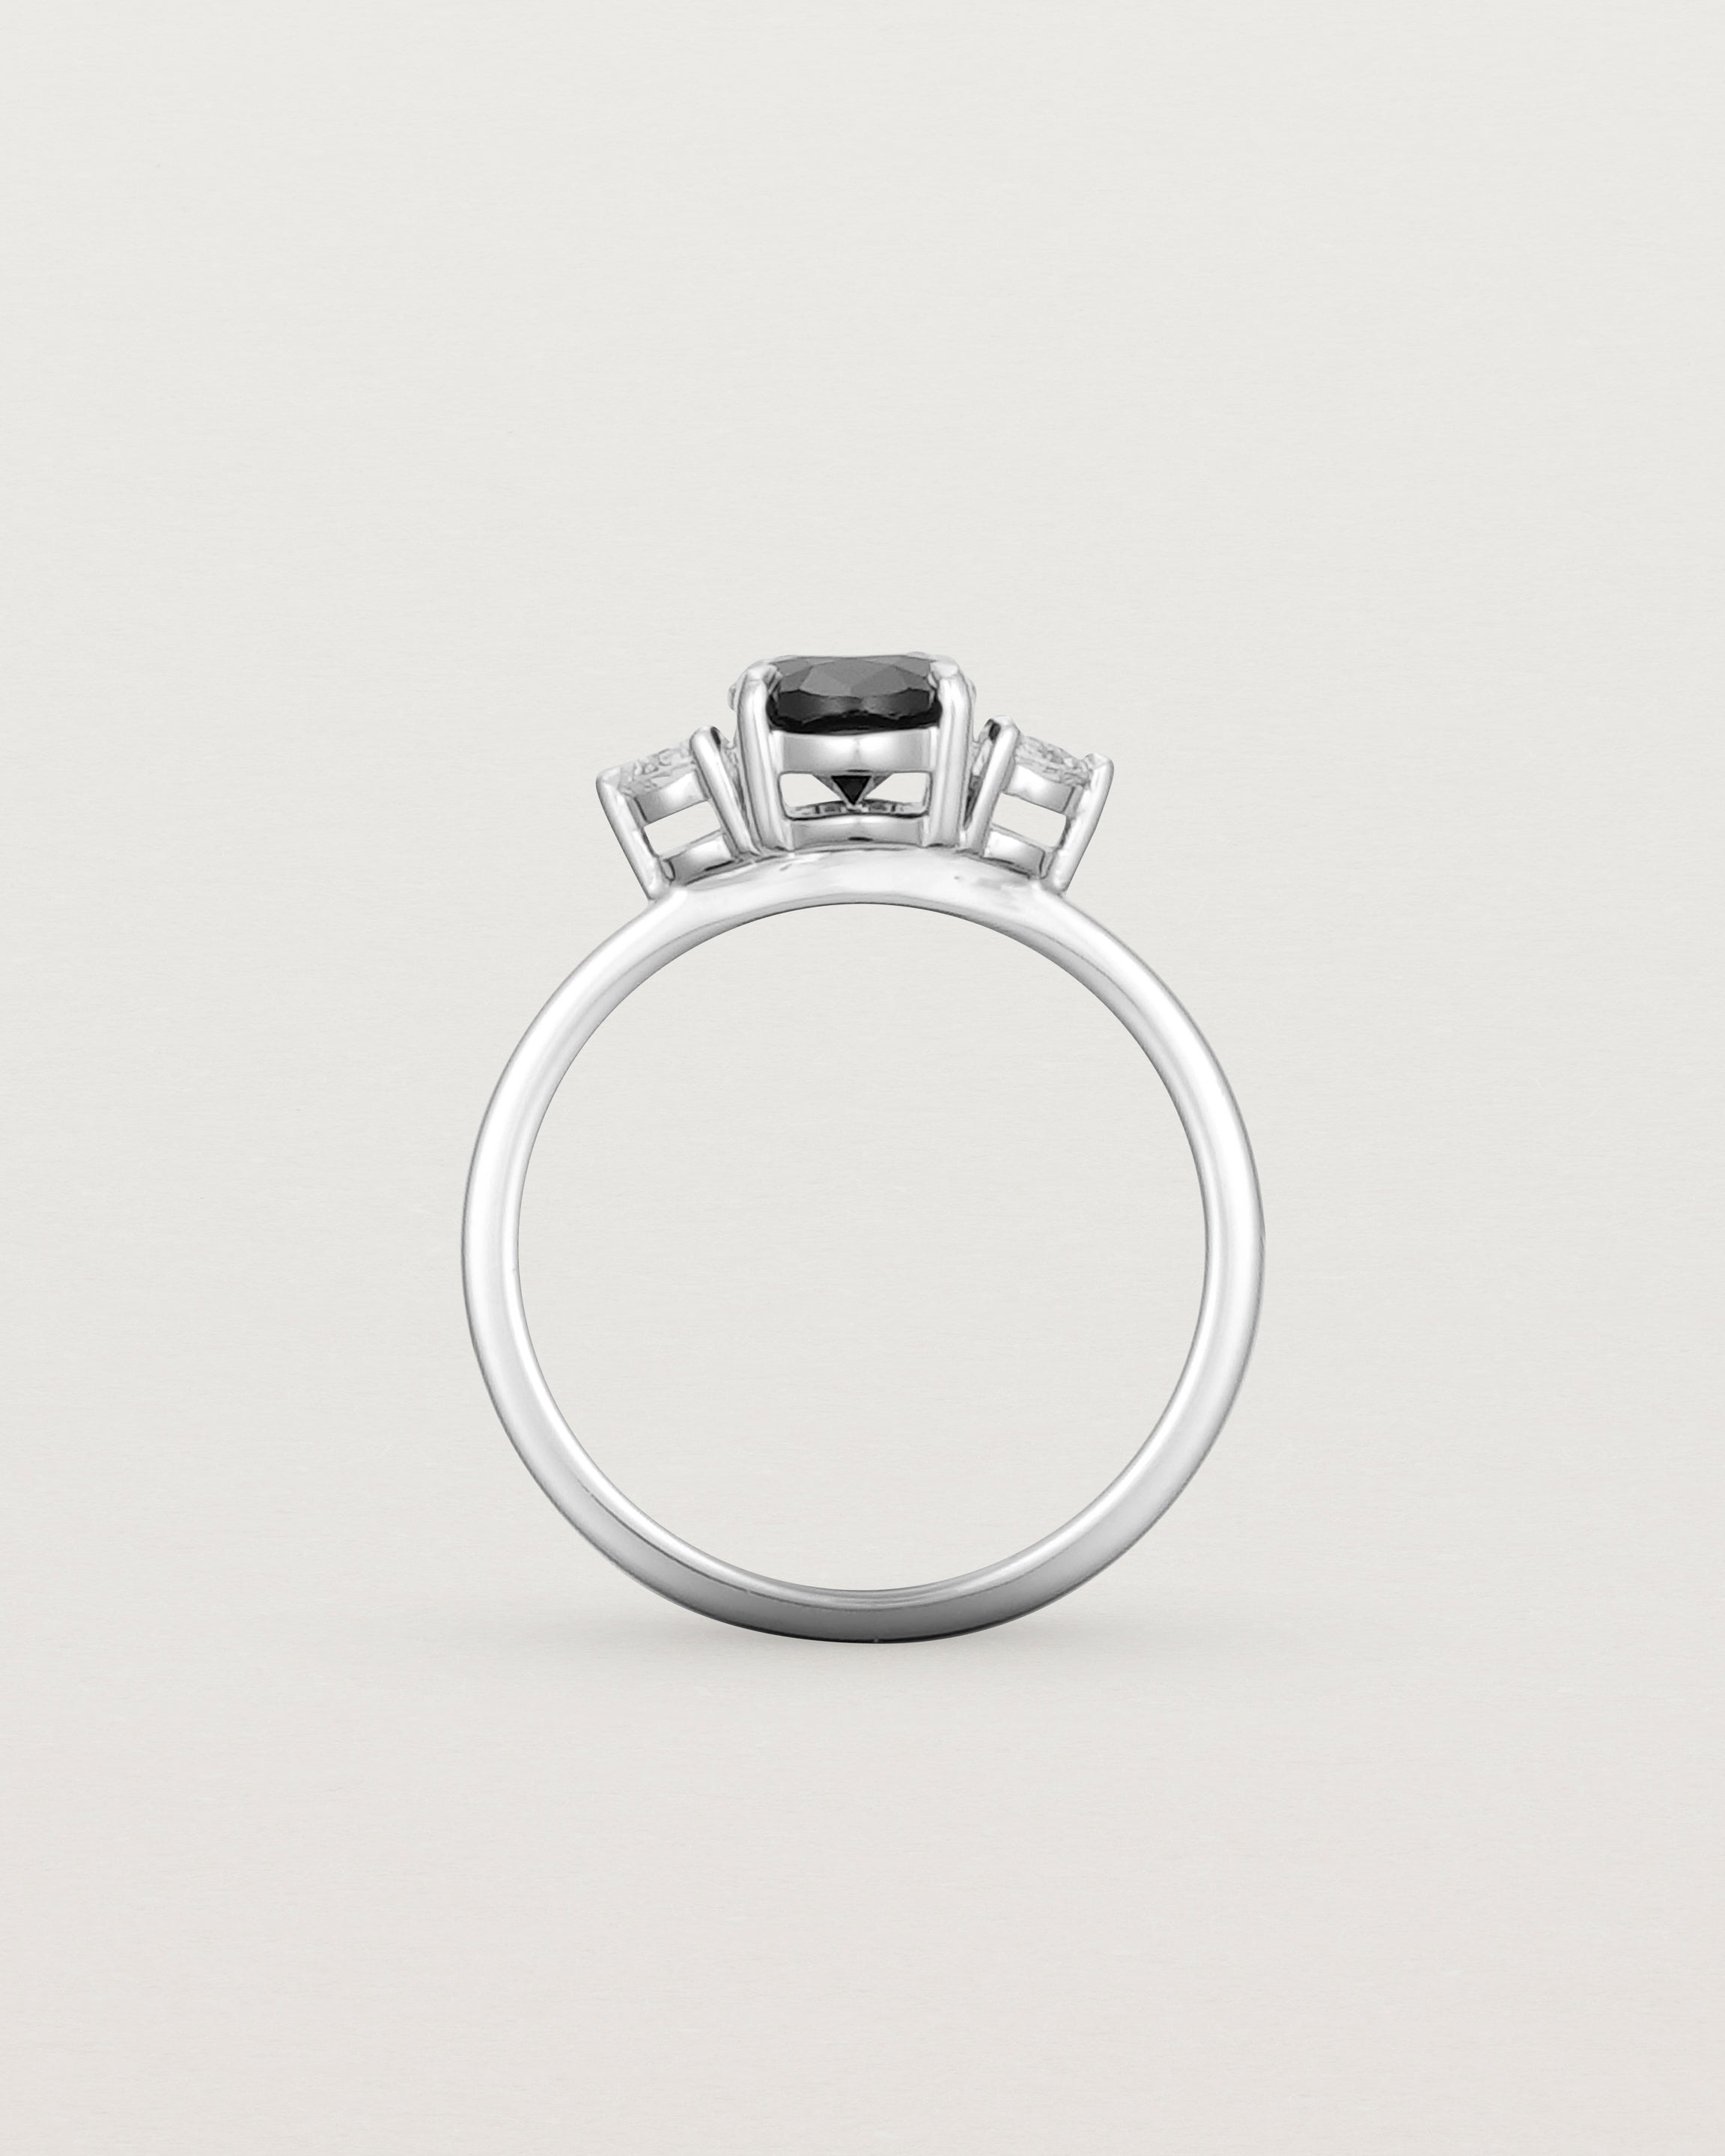 Standing view of the Una Oval Trio Ring | Black Spinel & Diamonds | White Gold.